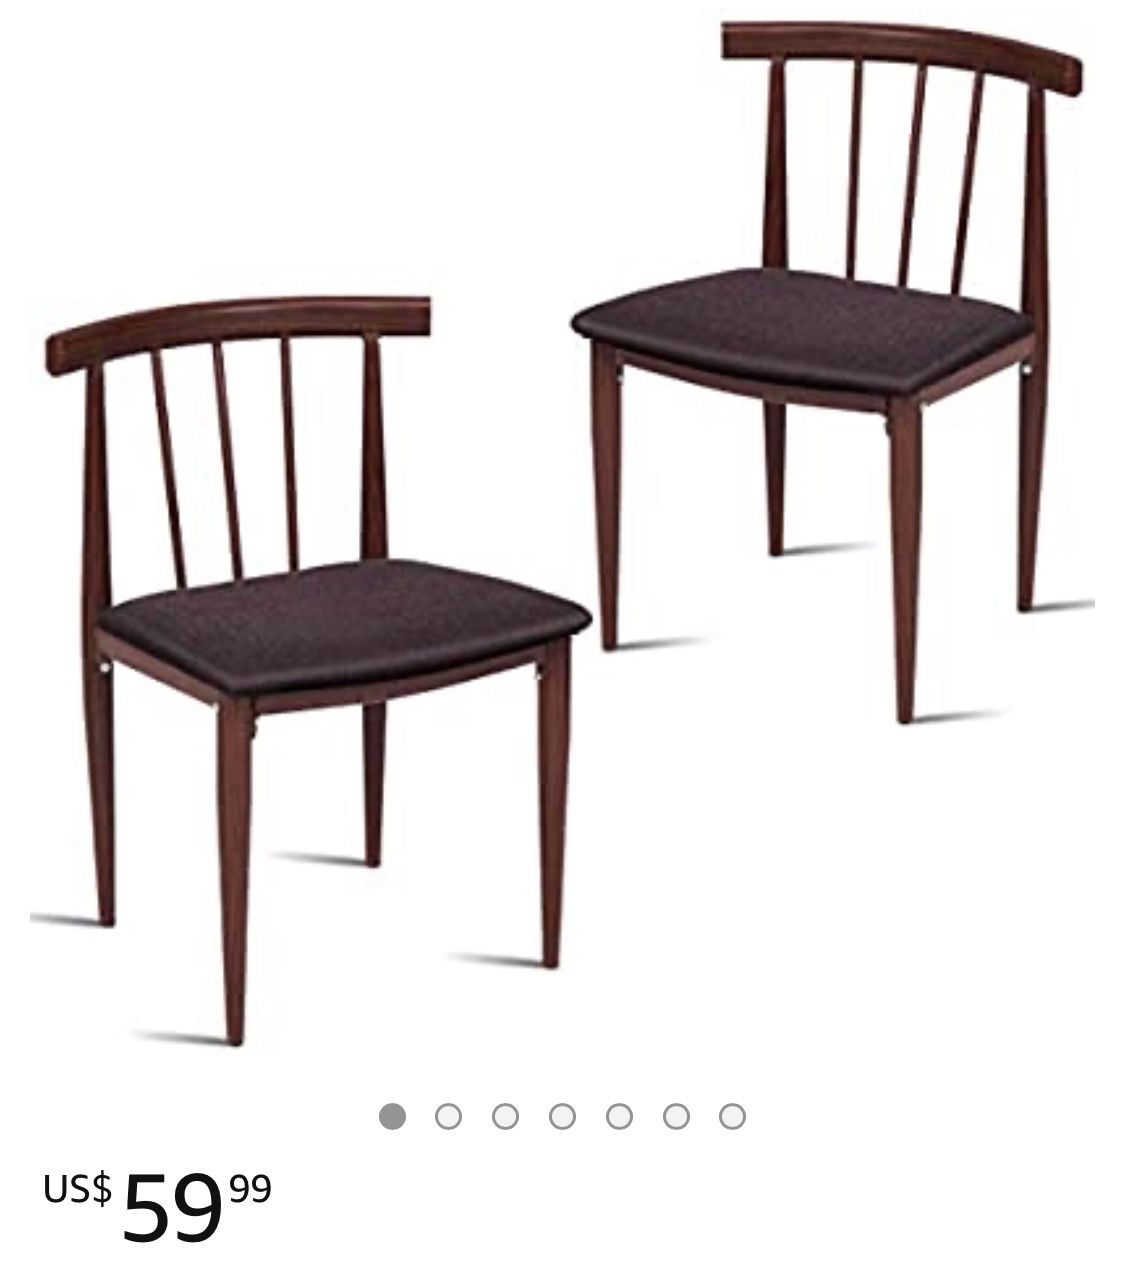 Set of 2 dining chairs